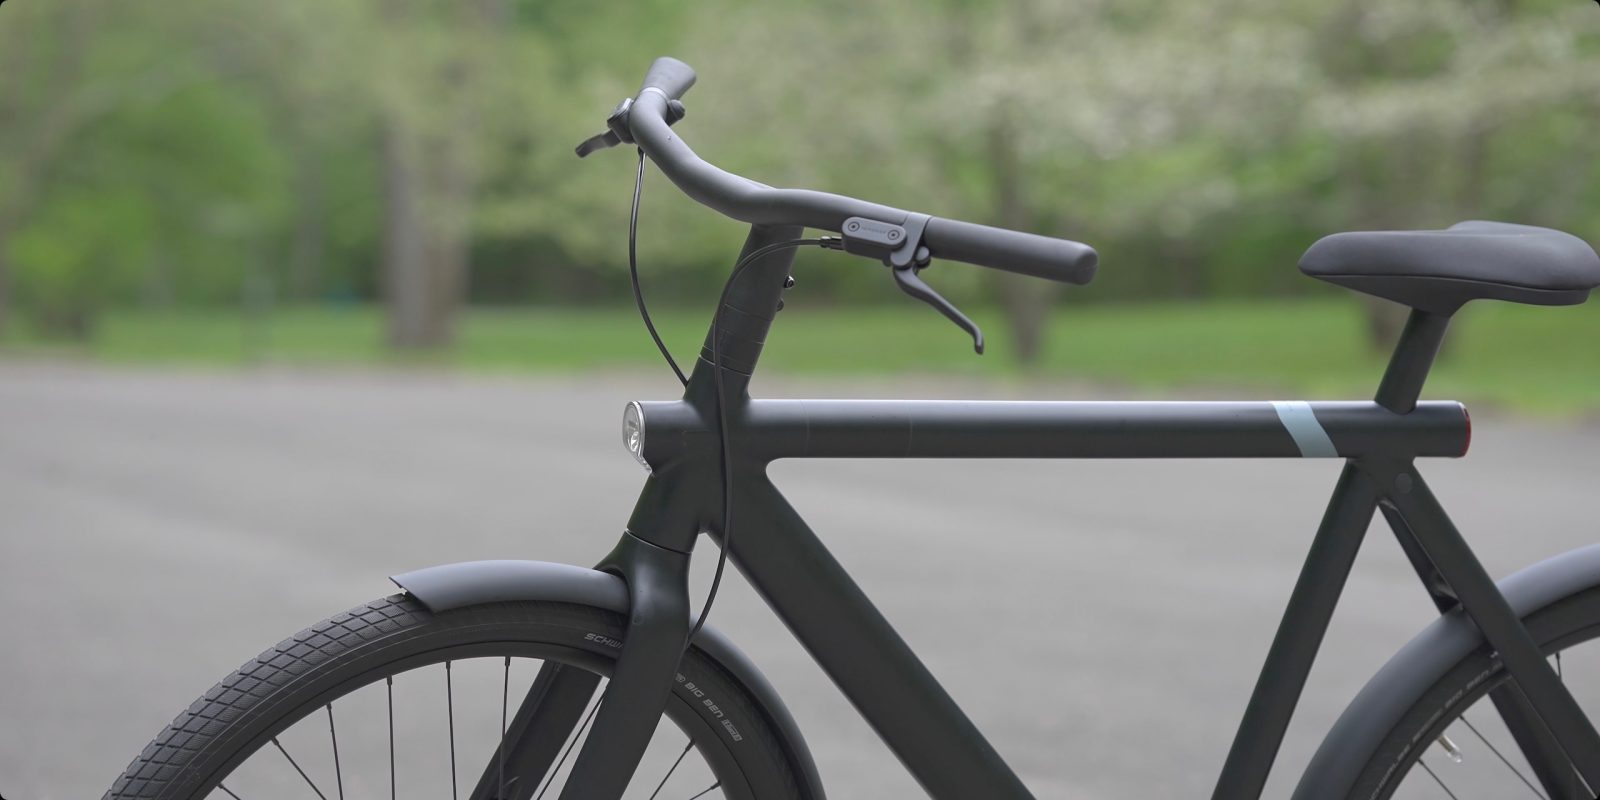 VanMoof S3 impressions: A ridiculously good-looking e-bike with